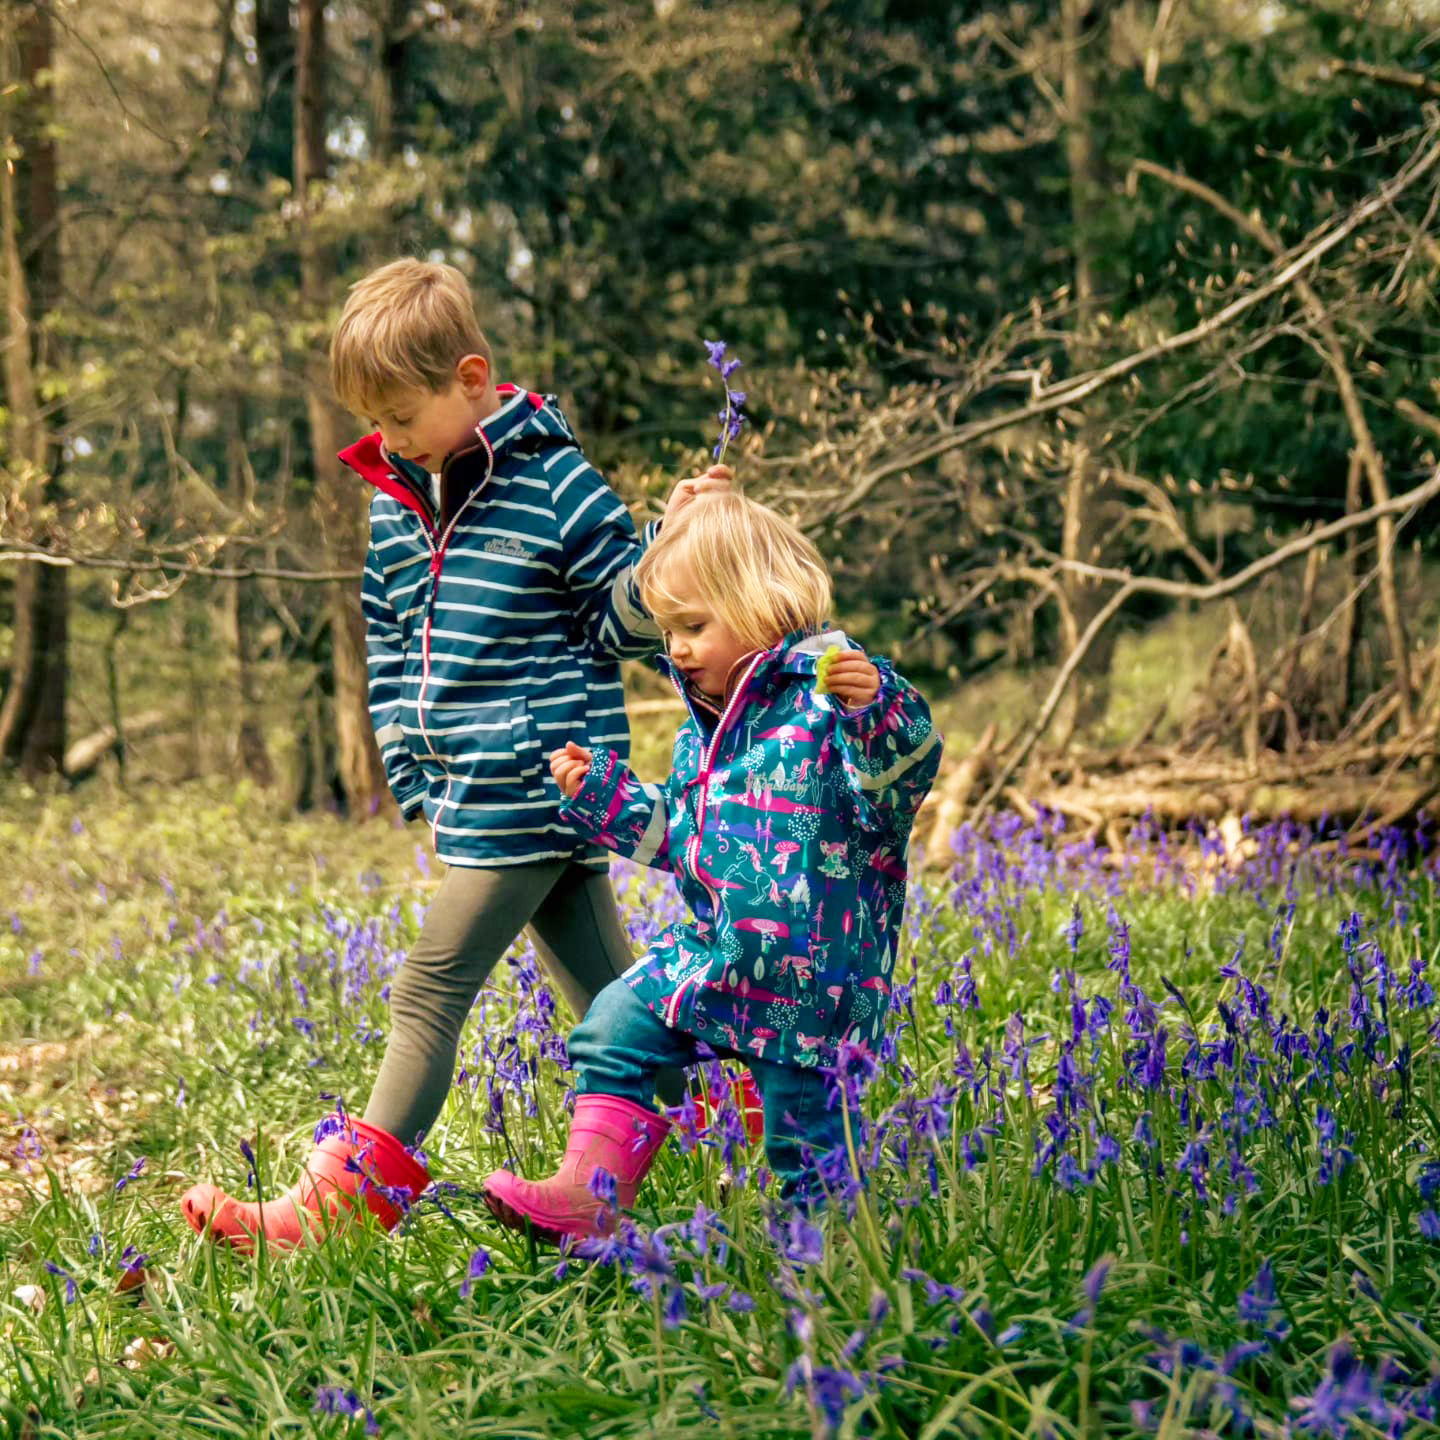 5 Ways to Re-Use Your Old Wellies